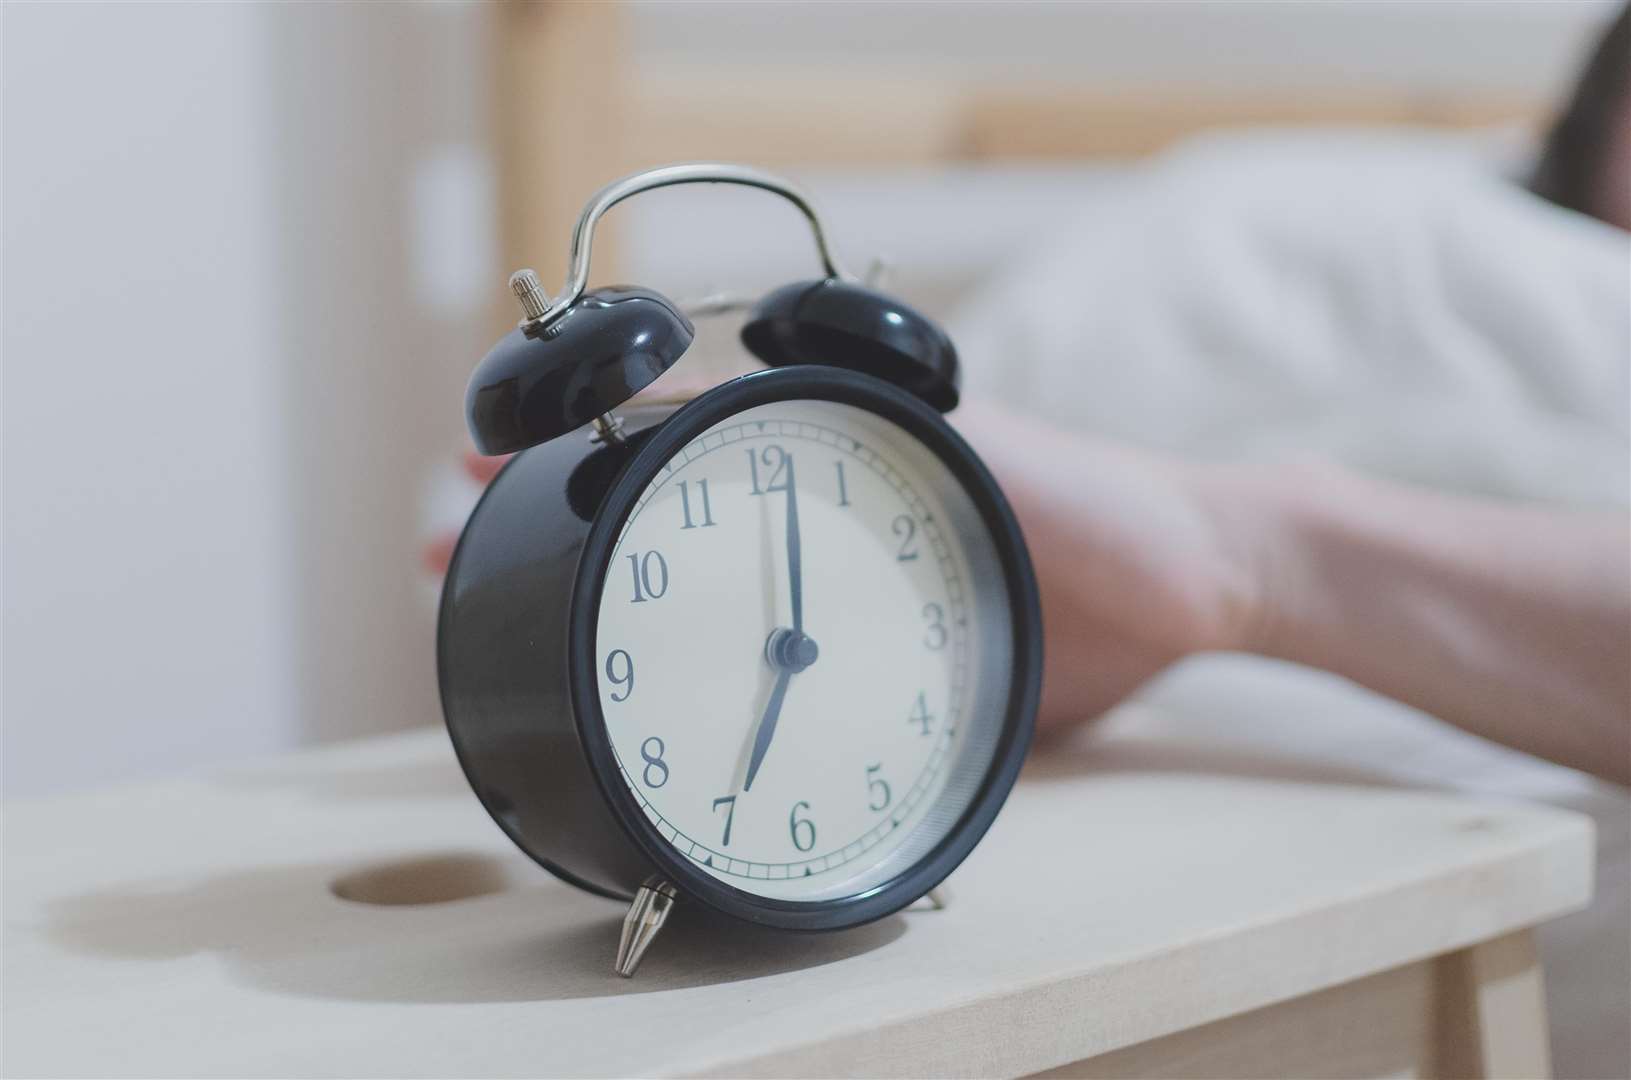 A 20 minute power nap is advised for anyone struggling to make it to bedtime